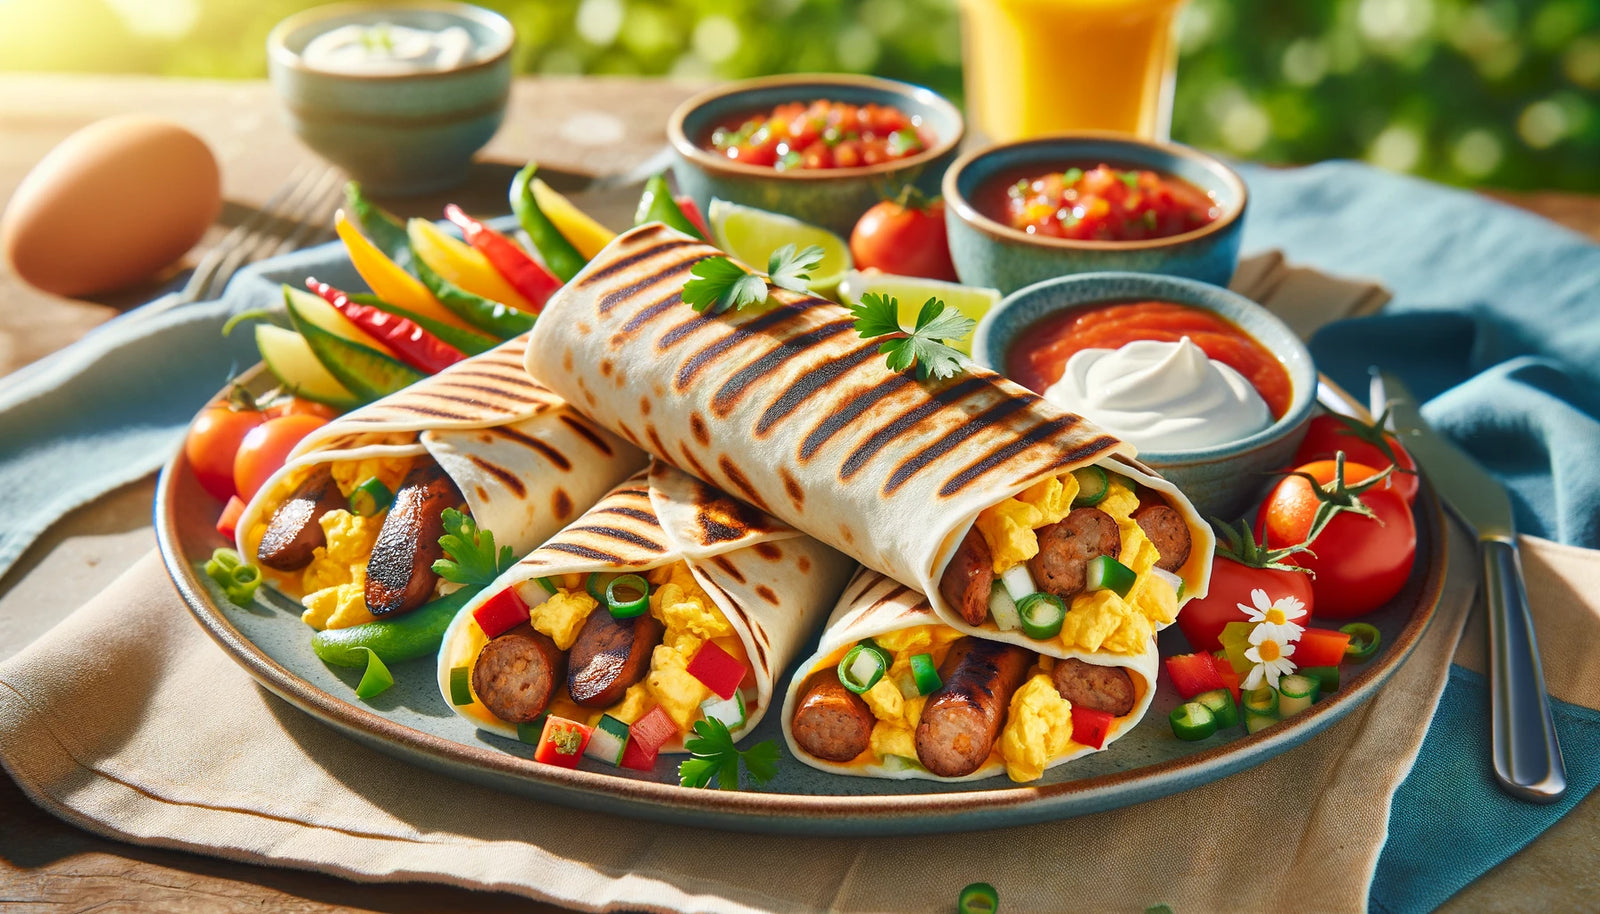 Grilled Breakfast Burrito Recipe on the Arteflame Grill